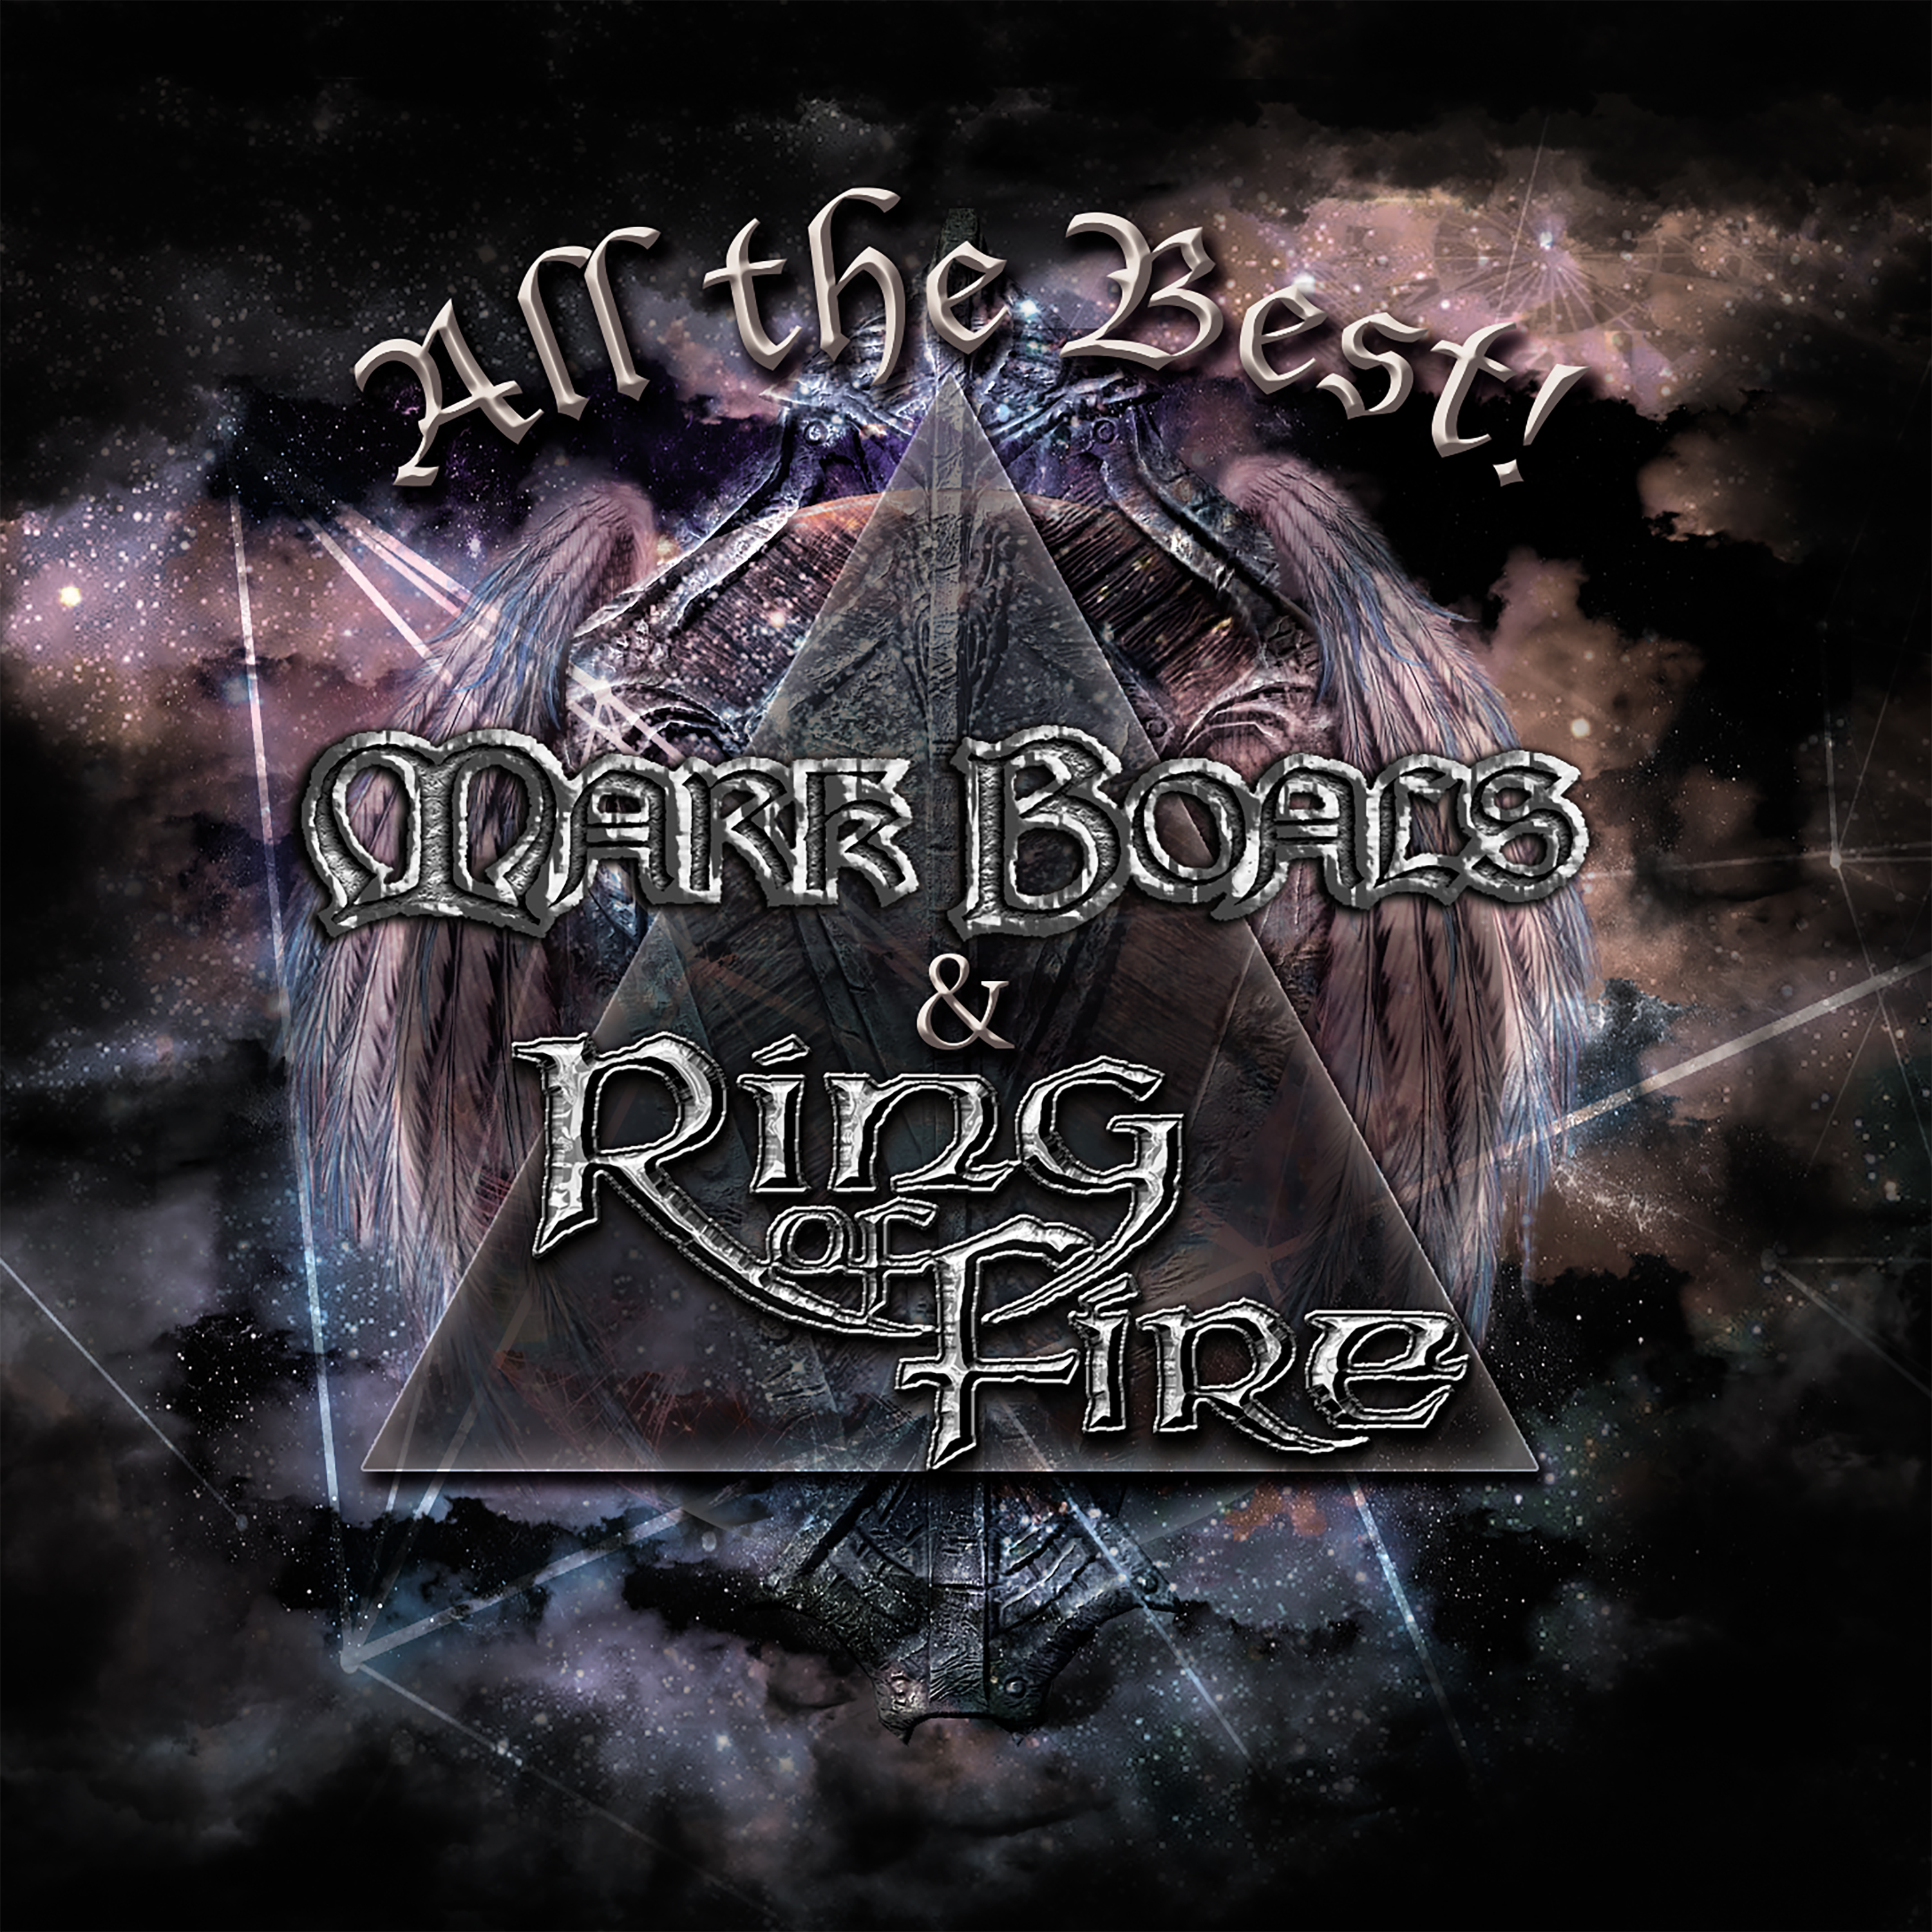 Mark Boals & Ring Of Fire - All The Best! - 2xCD